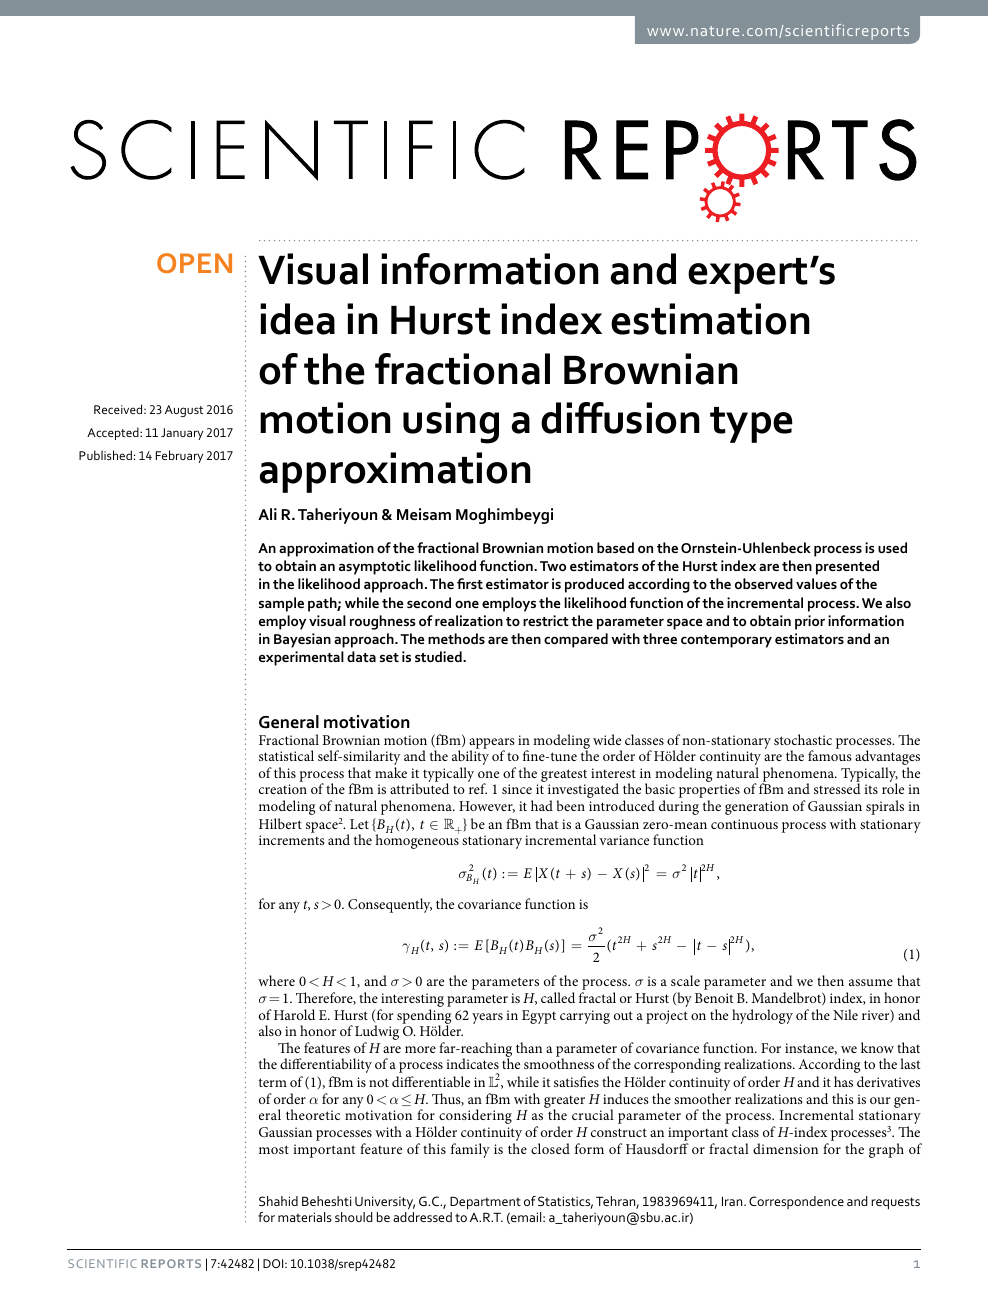 Visual Information And Expert S Idea In Hurst Index Estimation Of The Fractional Brownian Motion Using A Diffusion Type Approximation Topic Of Research Paper In Mathematics Download Scholarly Article Pdf And Read